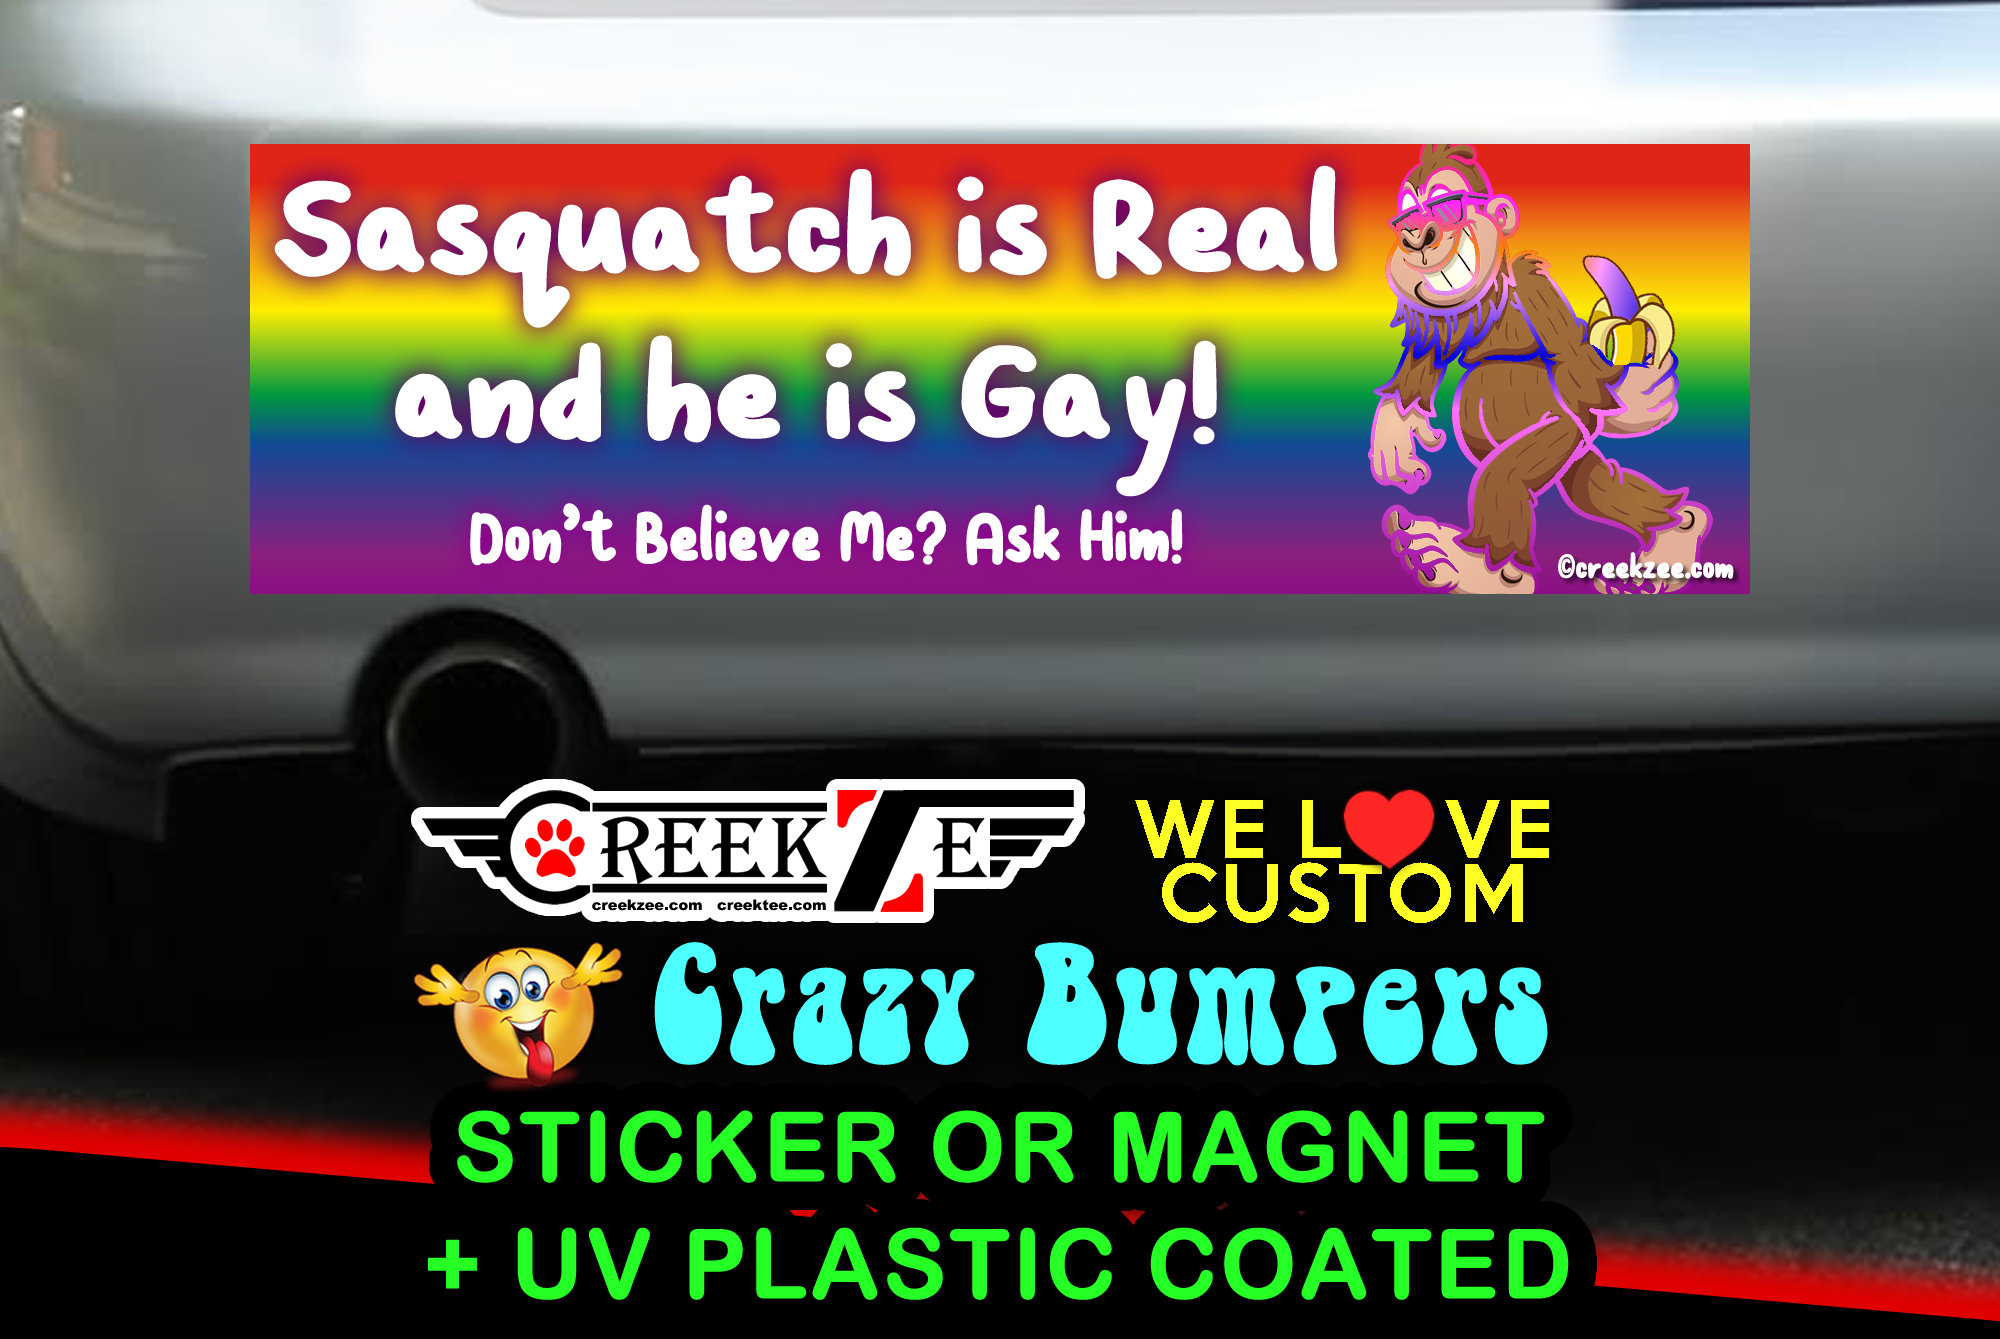 Sasquatch Is Real And He Is Gay - Funny Bumper Sticker or Magnet sizes 4